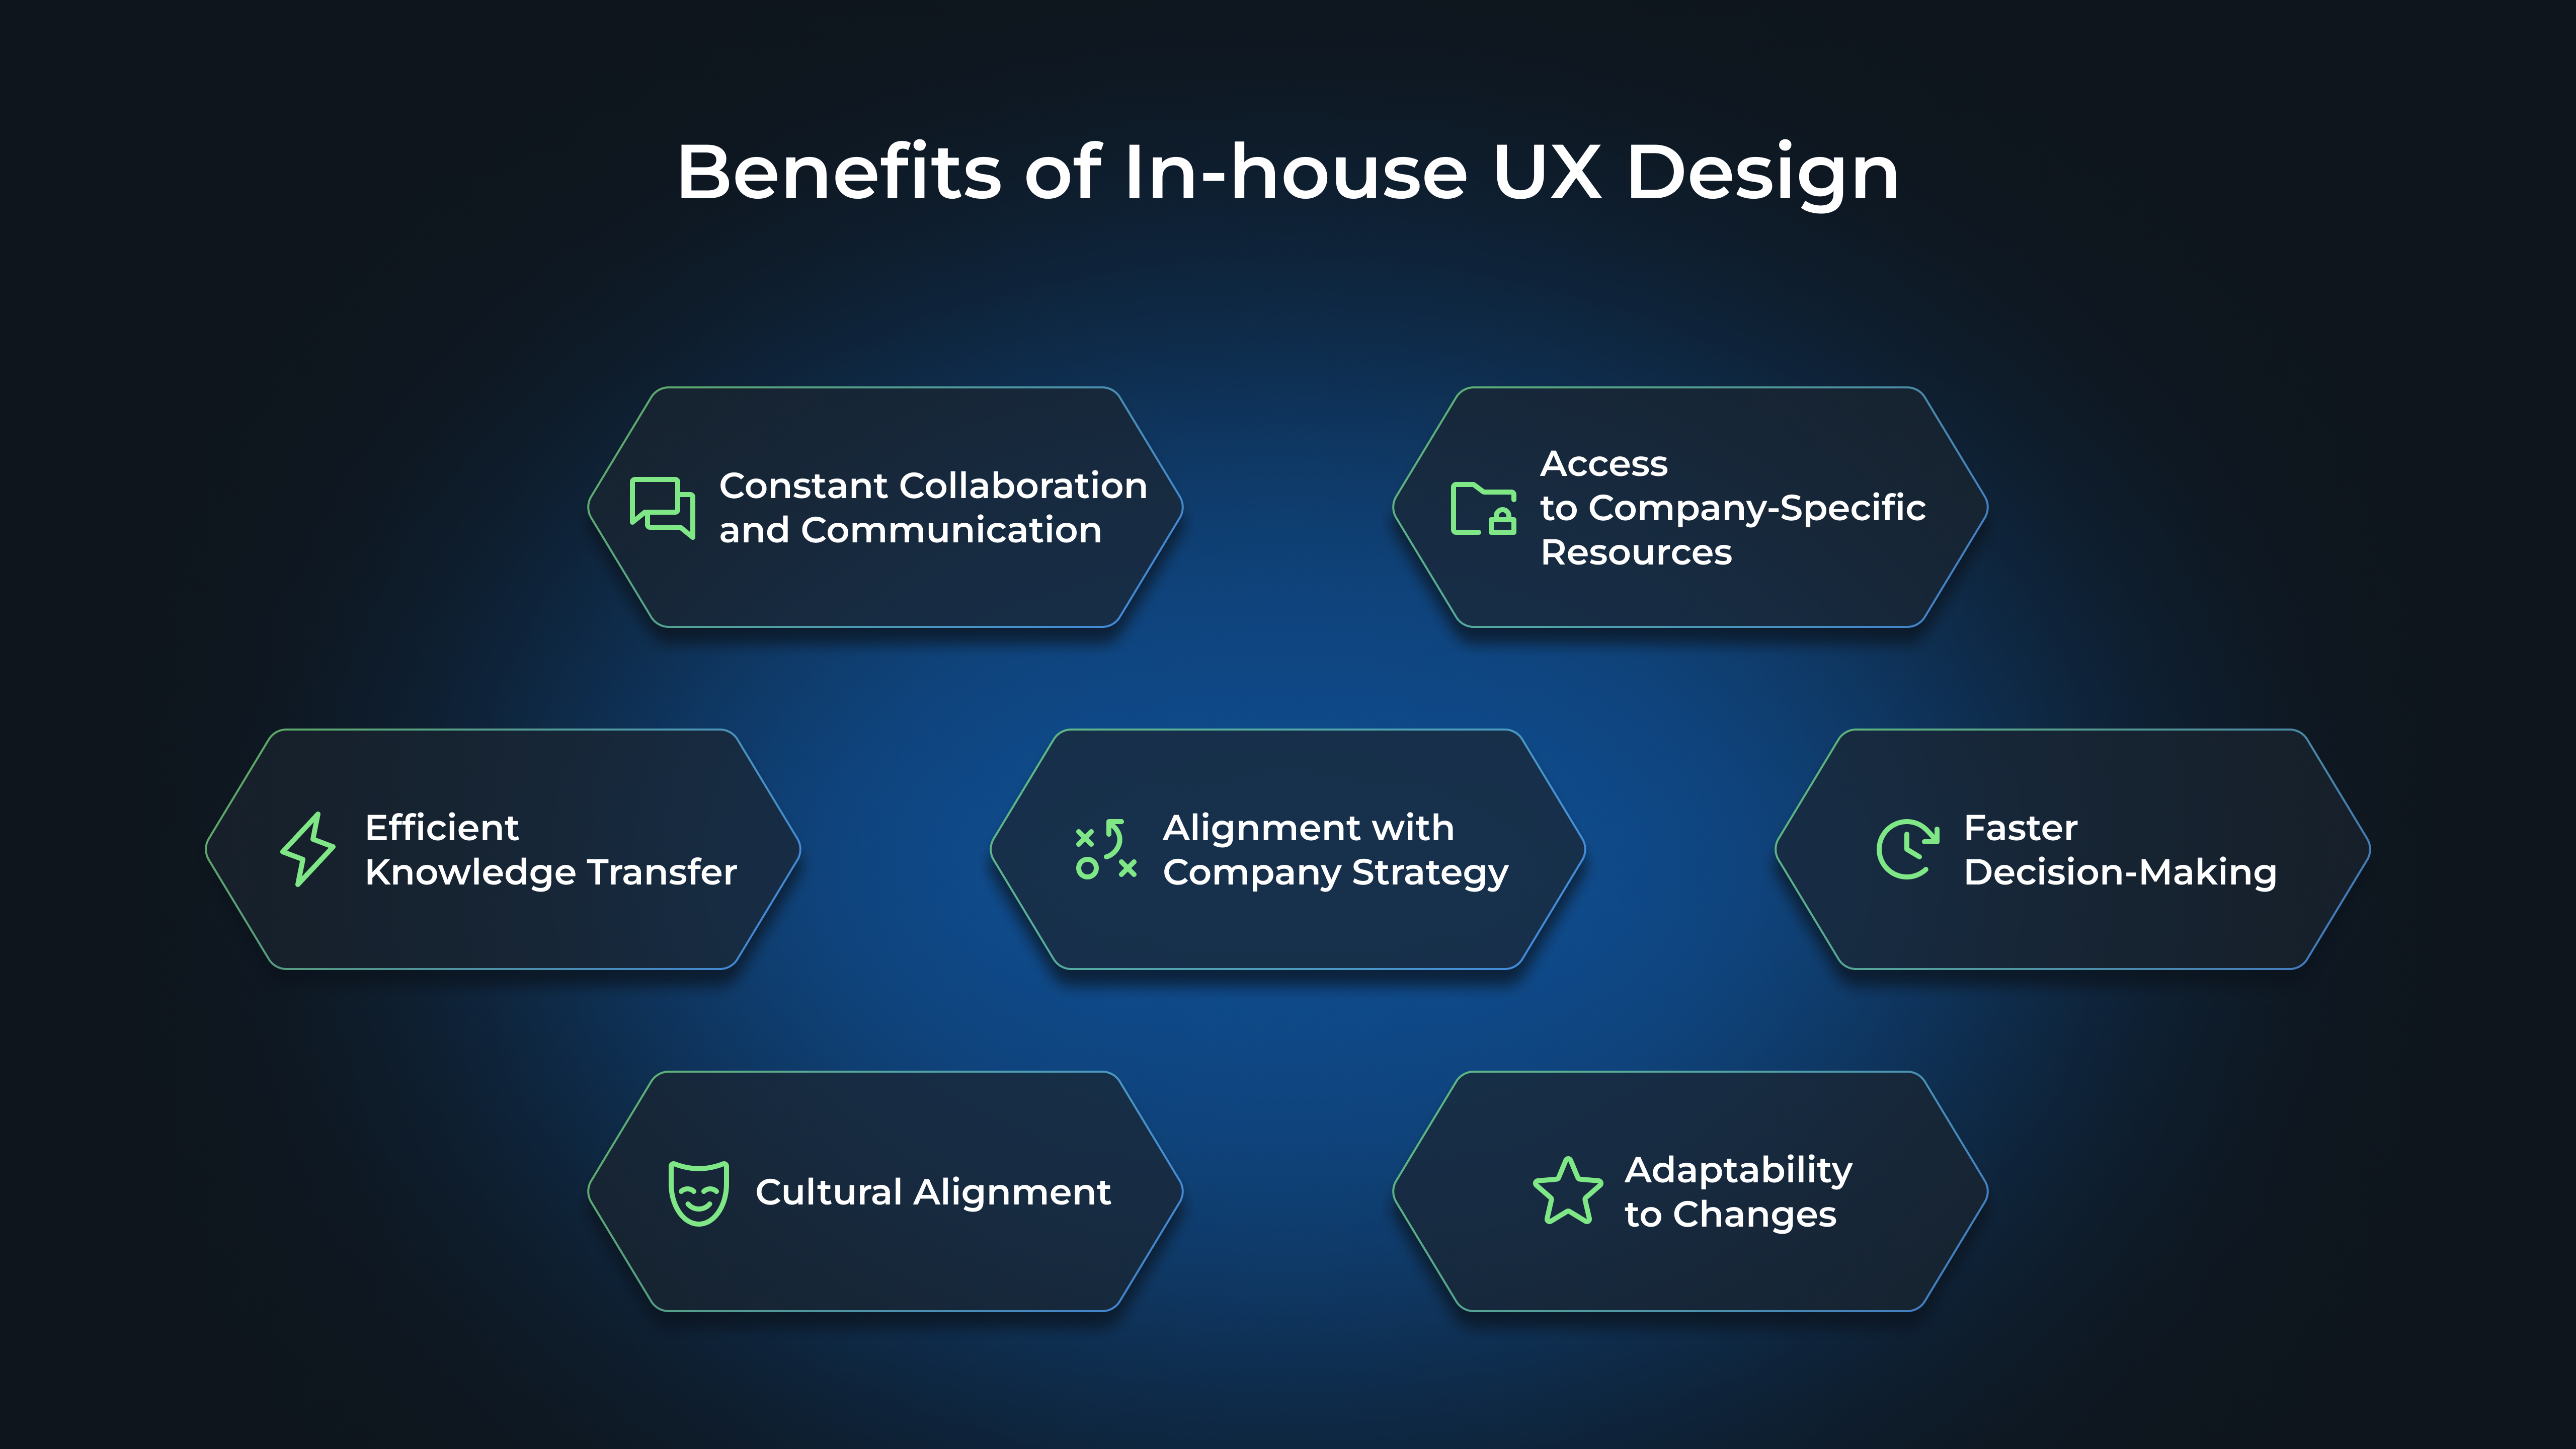 Benefits of In-house UX Design
Constant Collaboration and Communication
Access to Company-Specific Resources
Efficient Knowledge Transfer
Alignment with Company Strategy
Faster Decision-Making
Cultural Alignment
Adaptability to Changes
